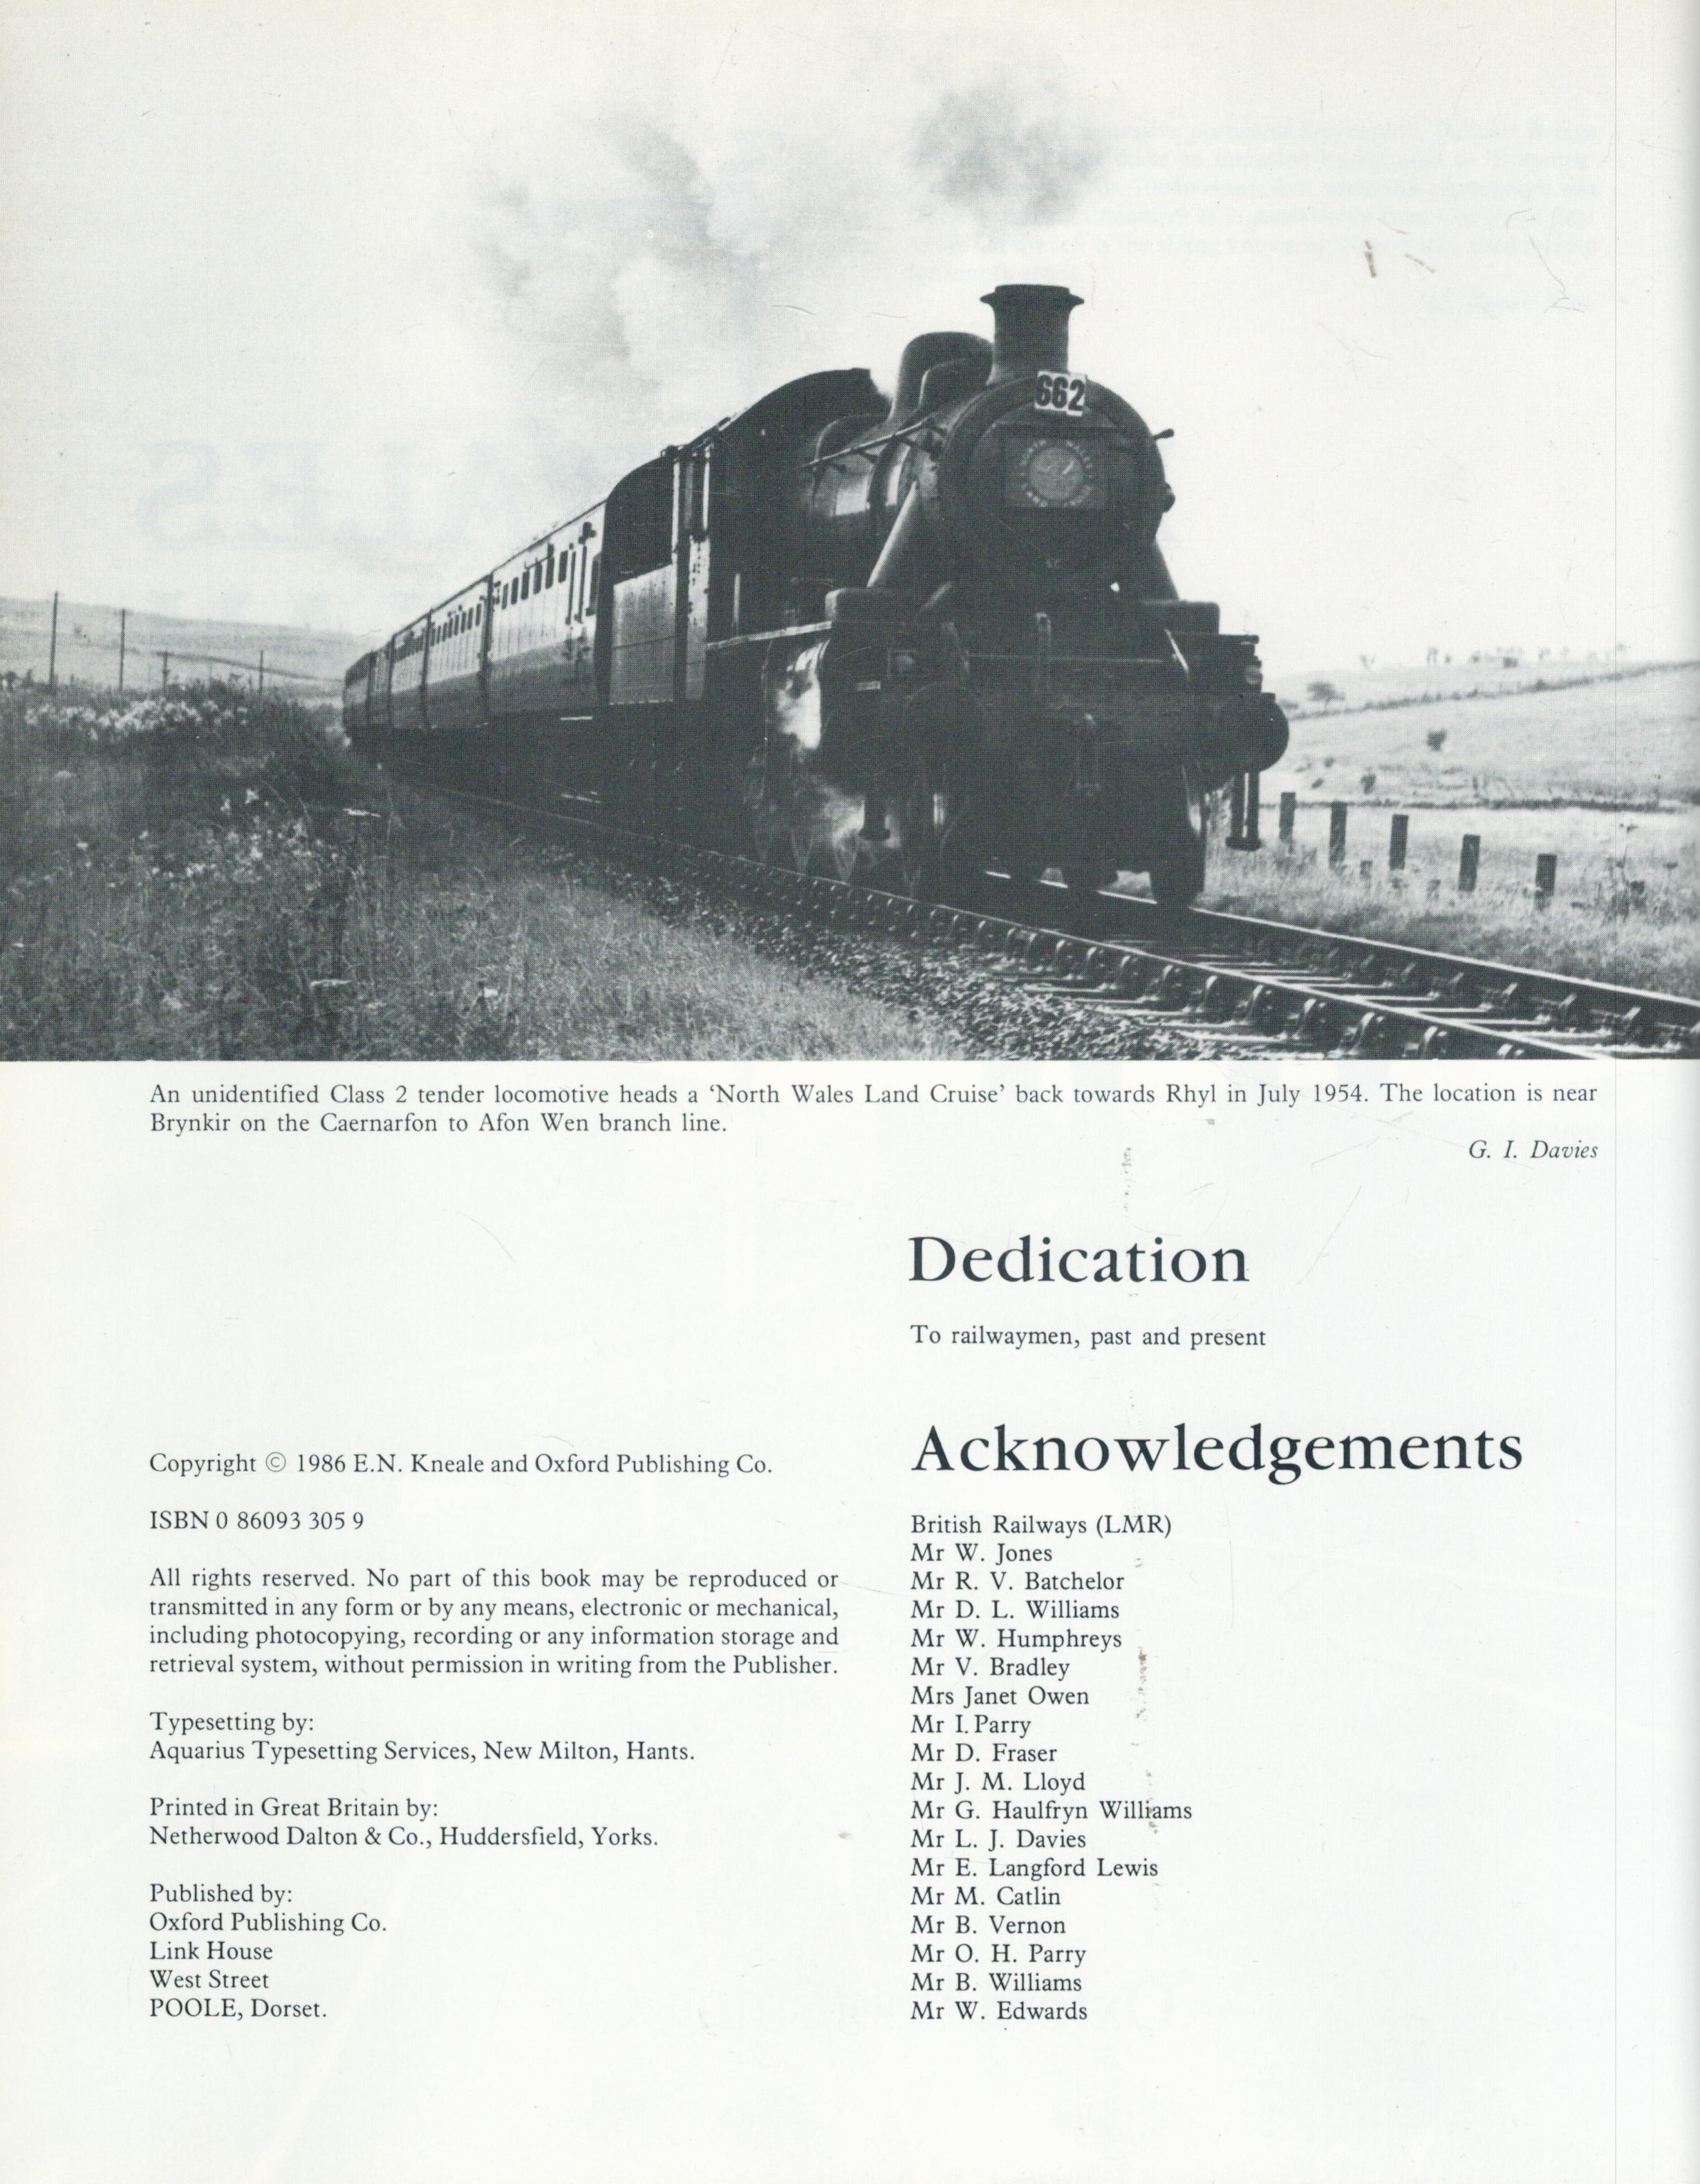 North Wales Steam vol 2 by E N Kneale 1986 First Edition Hardback Book published by Oxford - Image 3 of 3